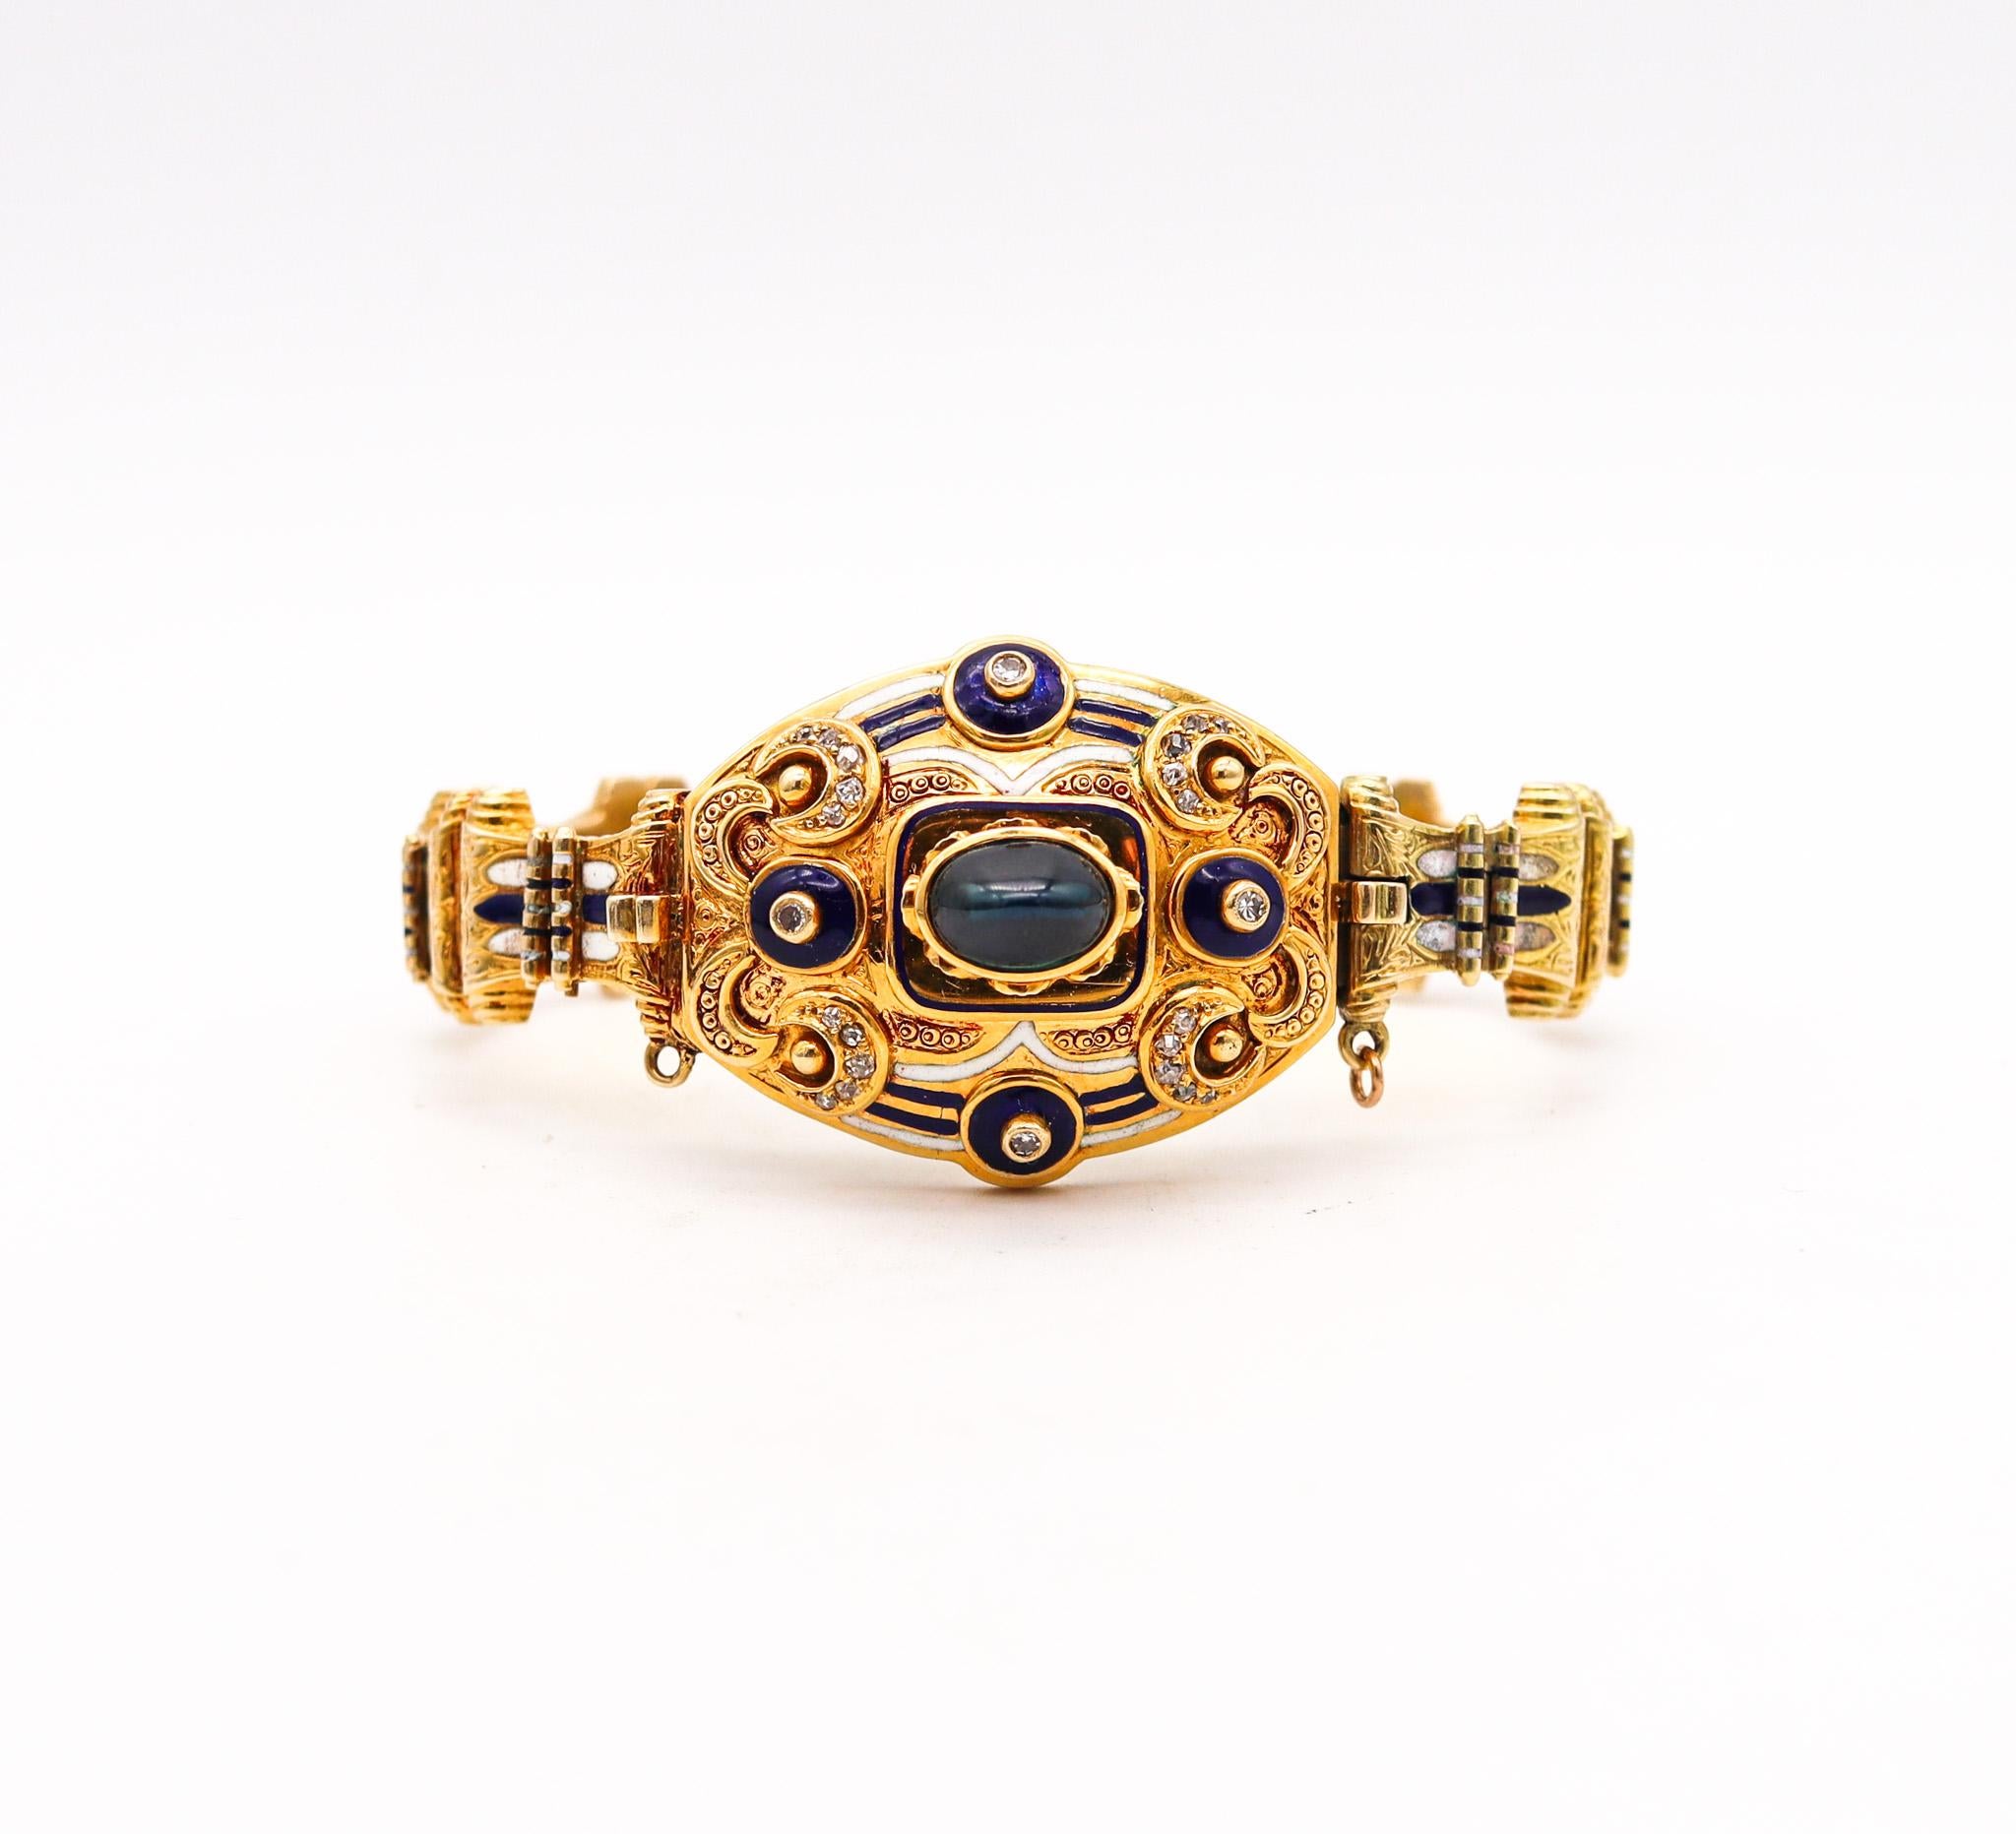 Am Edwardian enameled bracelet.

Very beautiful flexible bracelet, created during the transition of the Victorian to the Edwardian periods, back in the 1900. This bracelet show intricate Victorian patterns with chiseled classical motifs from the